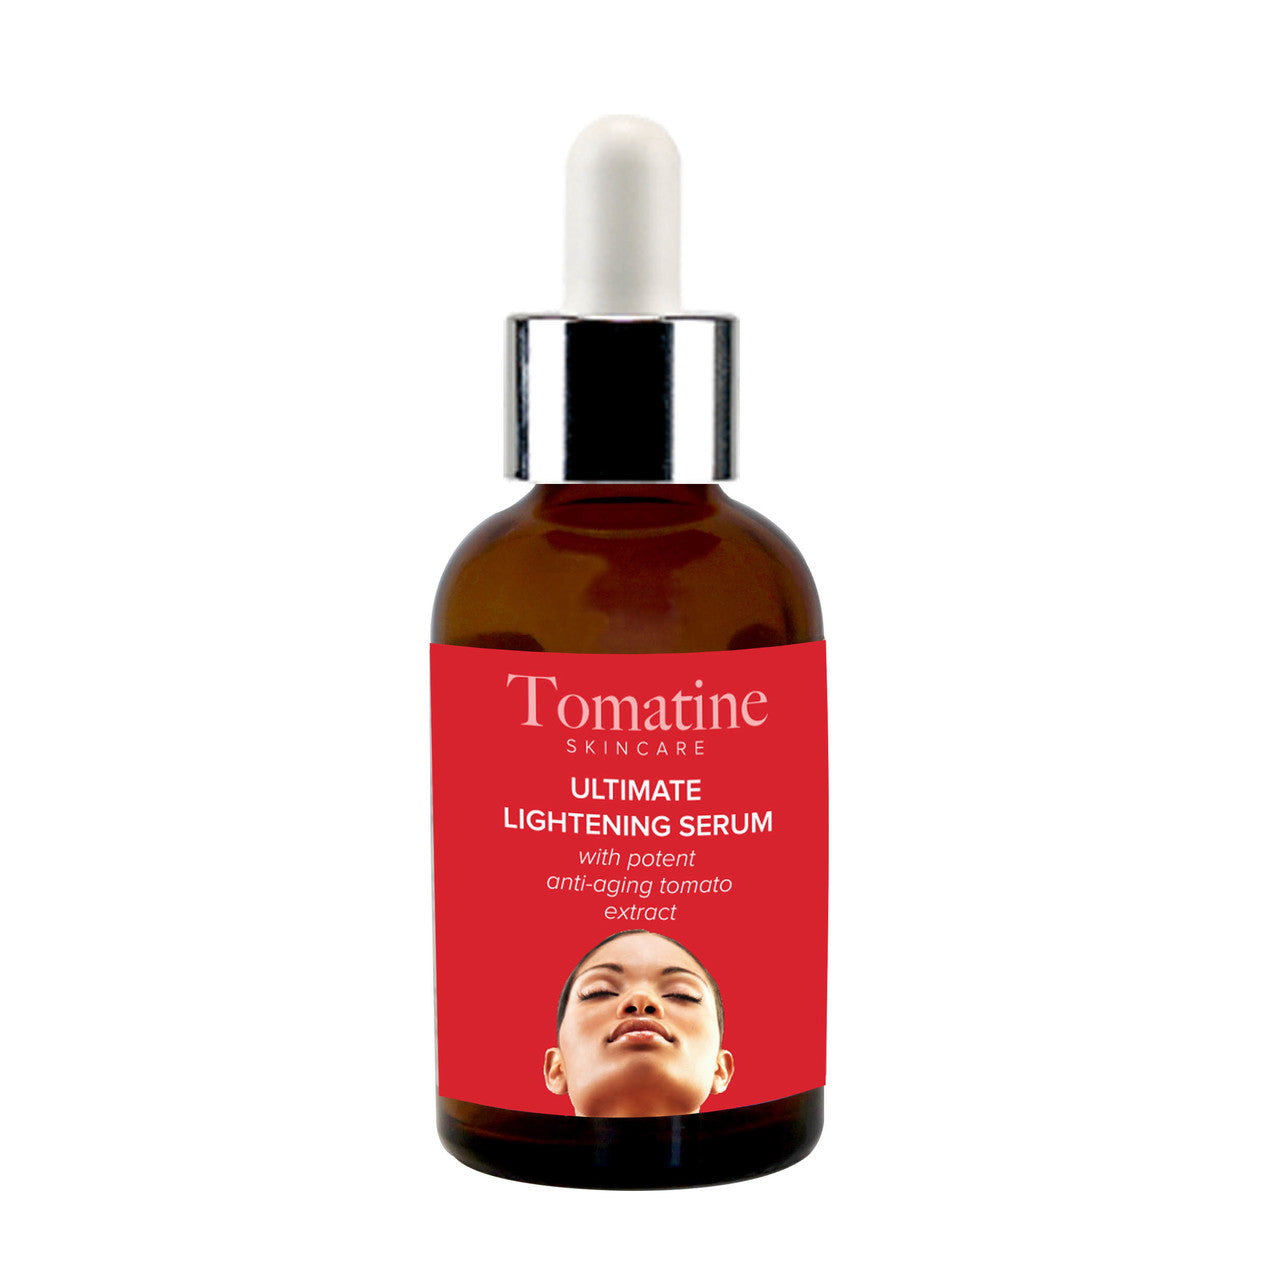 Tomatine Ultimate Lightening Serum 30ml Tomatine - Mitchell Brands - Skin Lightening, Skin Brightening, Fade Dark Spots, Shea Butter, Hair Growth Products